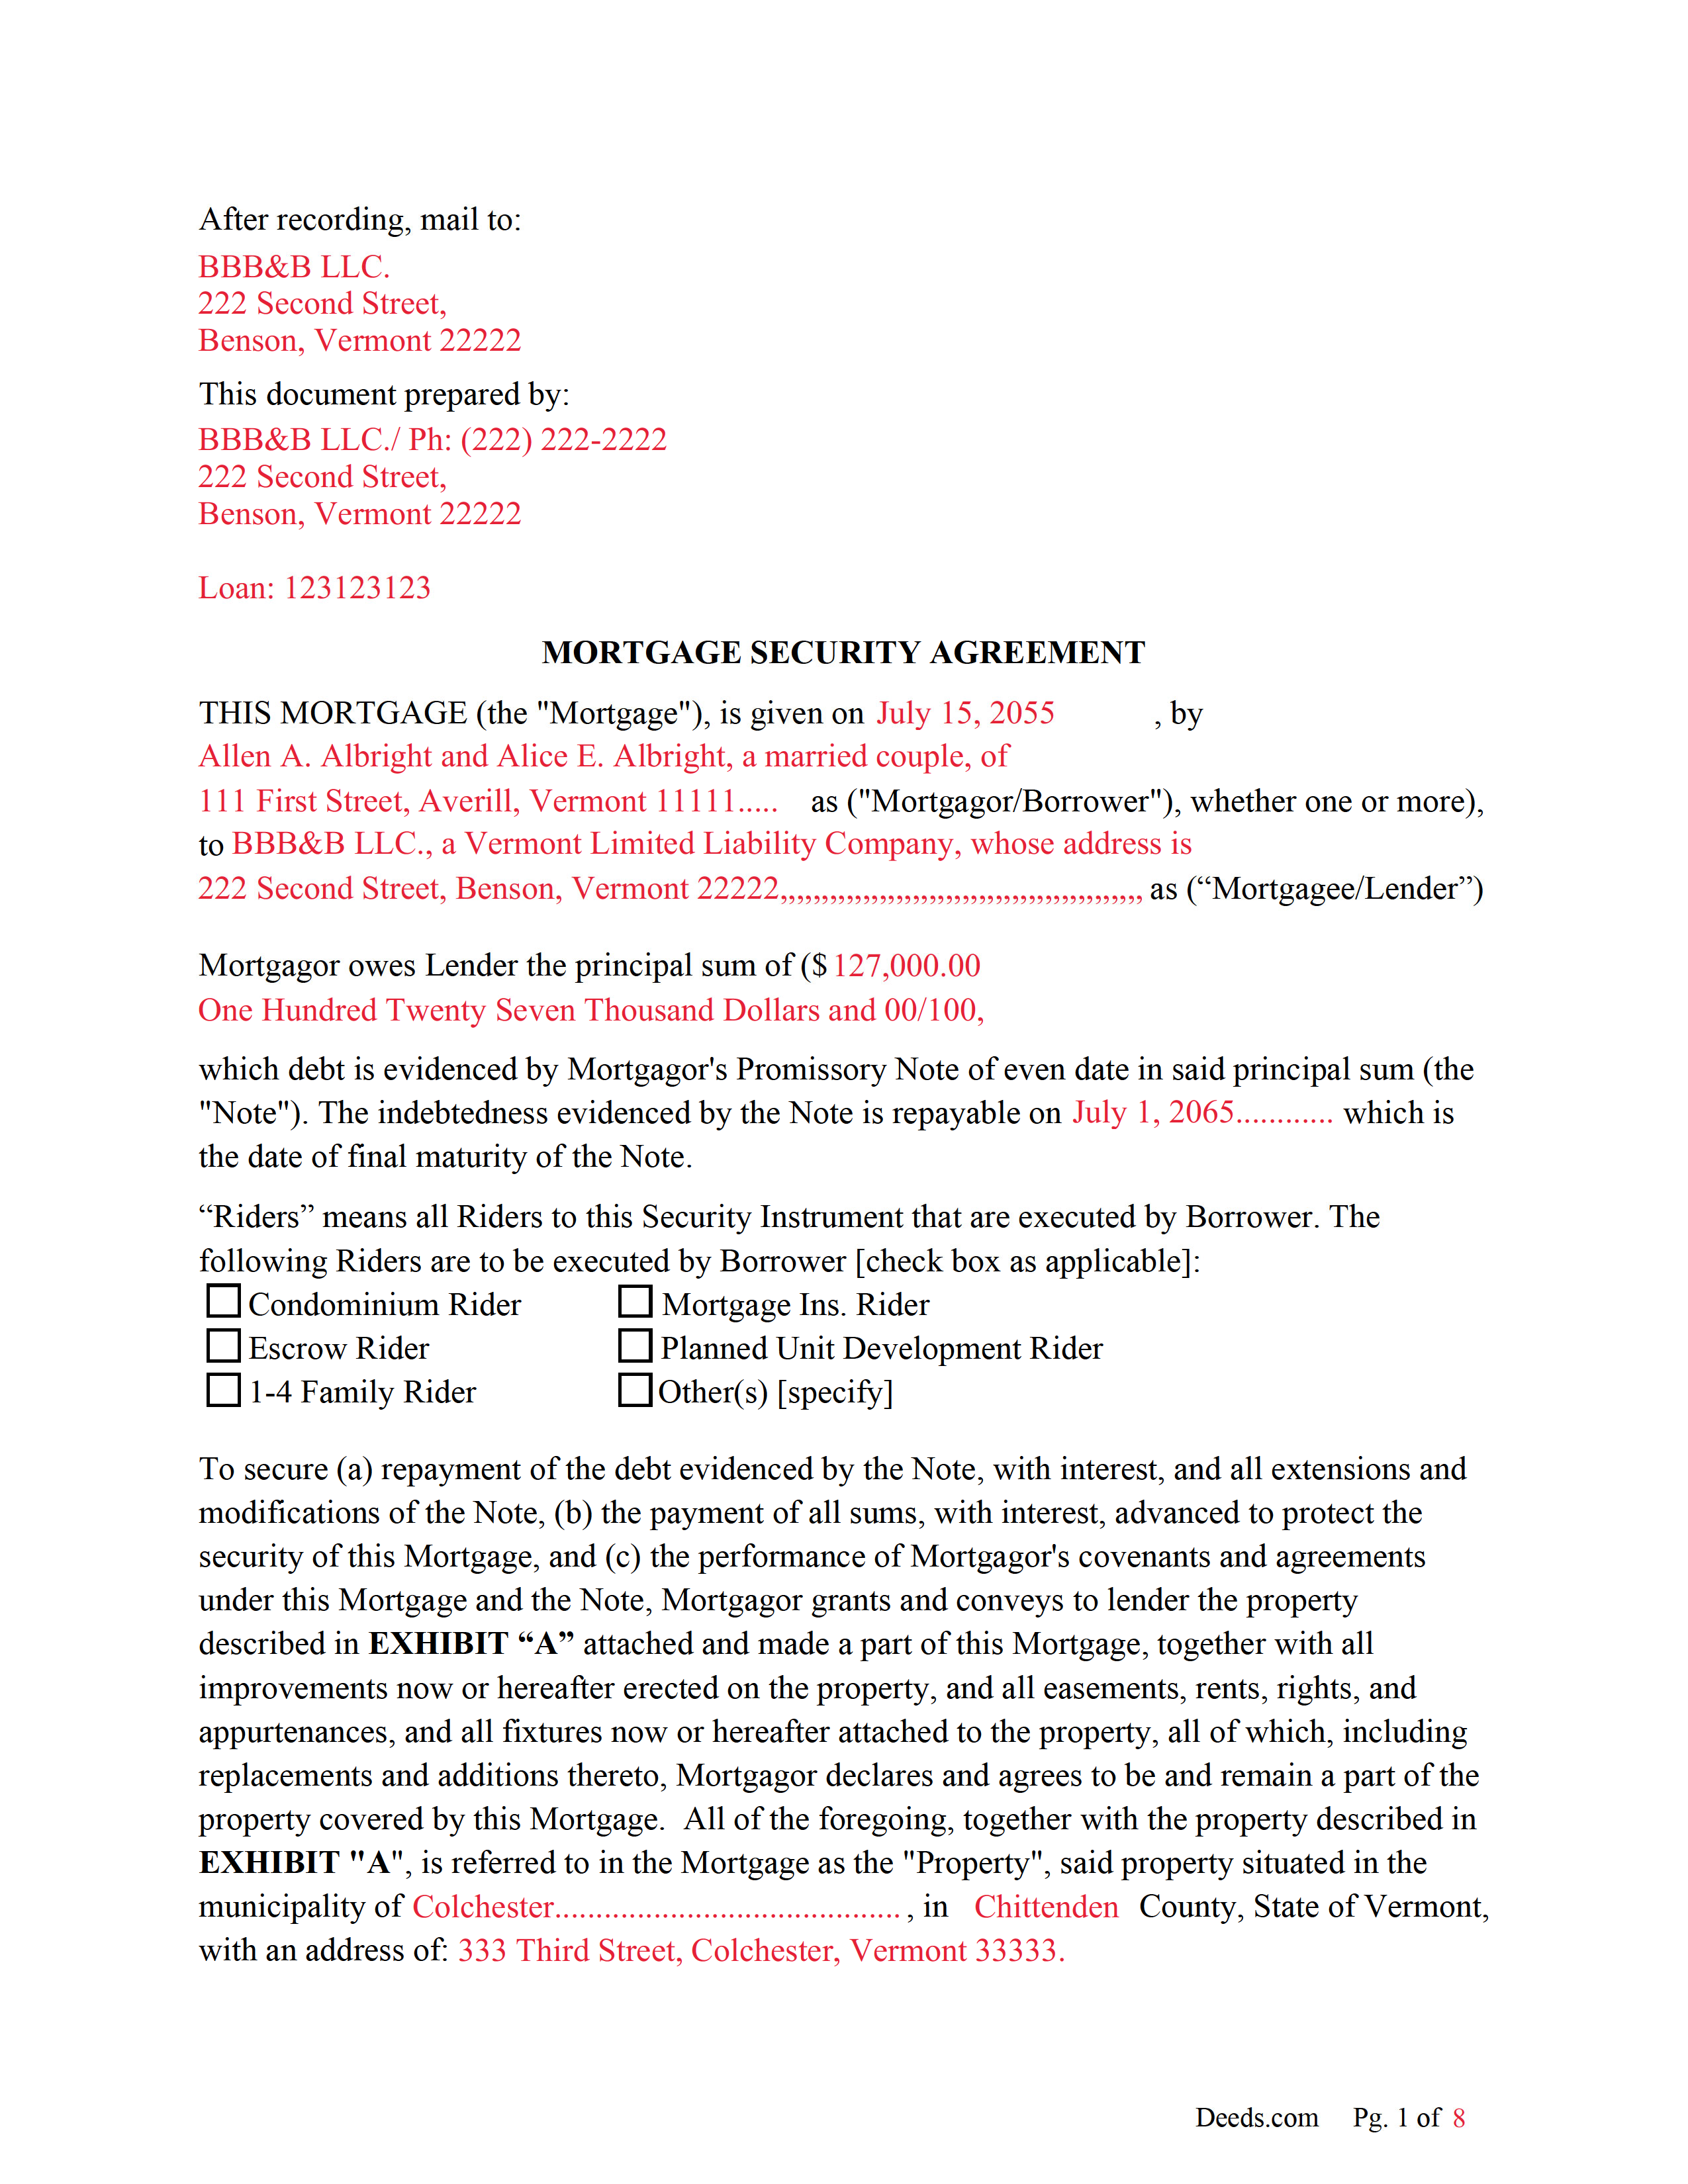 Completed Example of the Mortgage Document